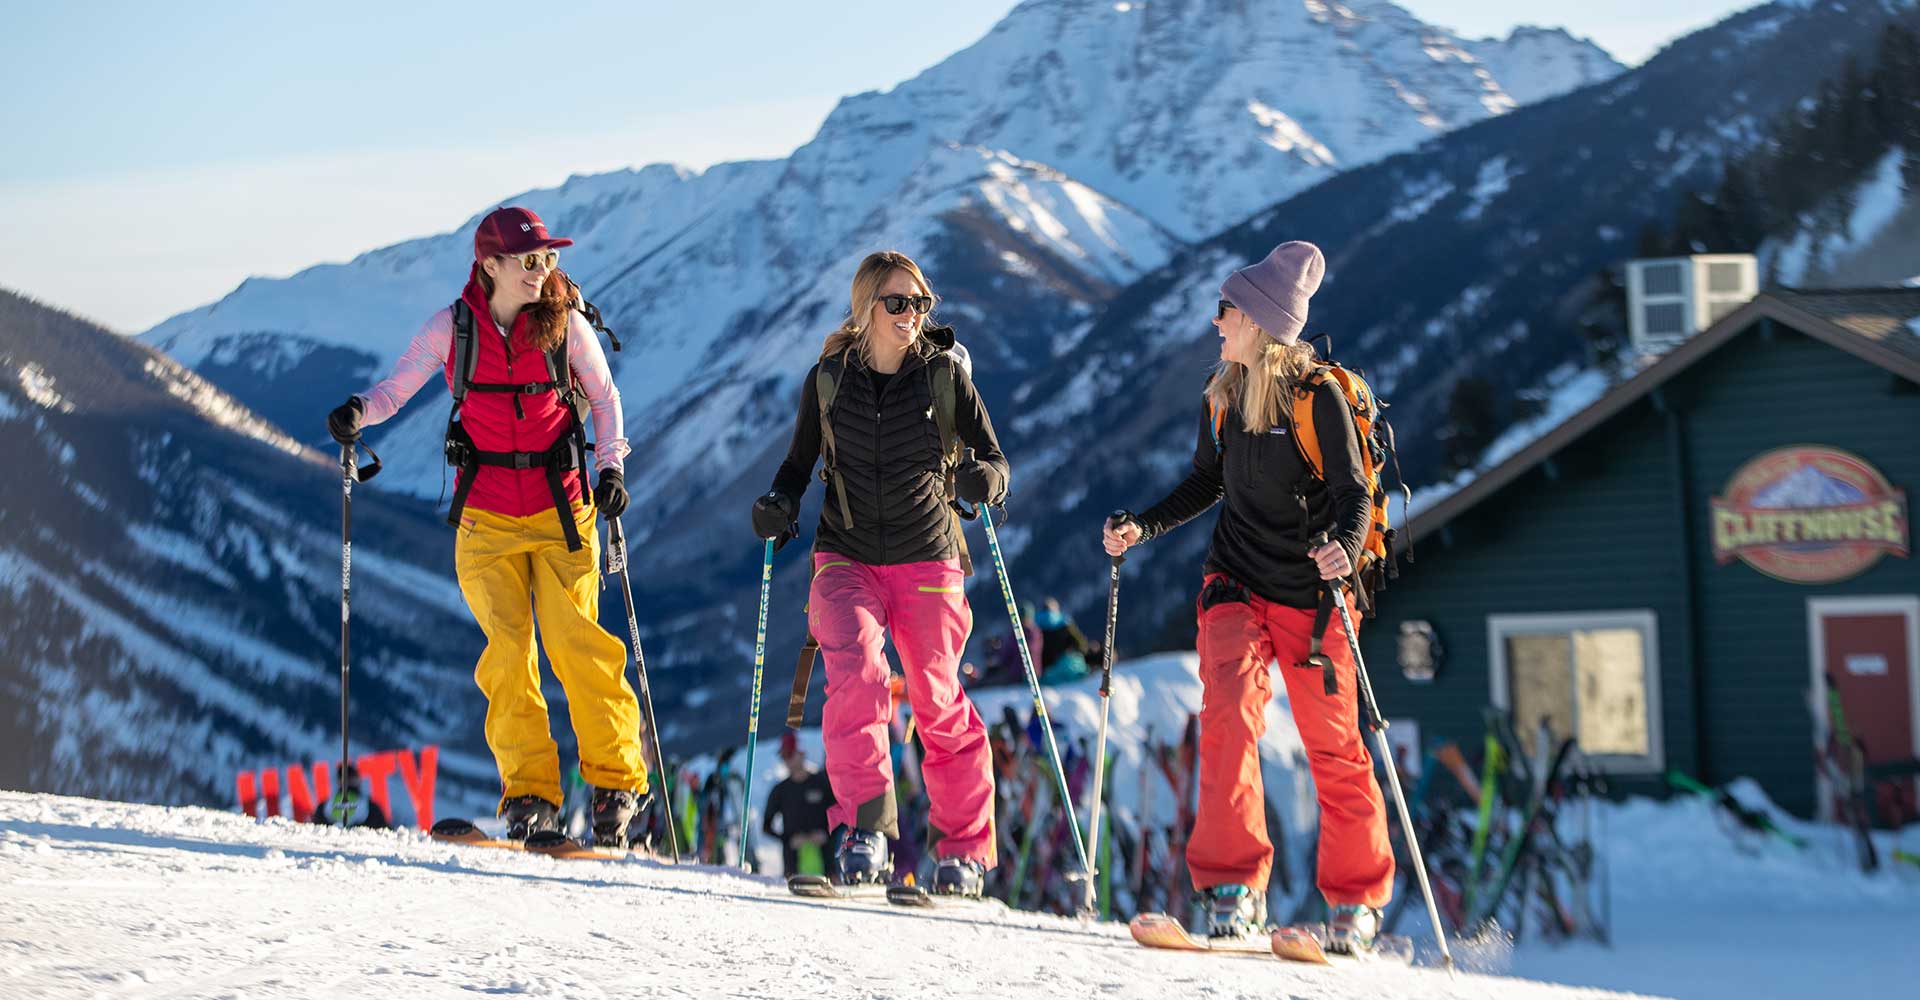 Three friends reach the top of Buttermilk on uphill skis